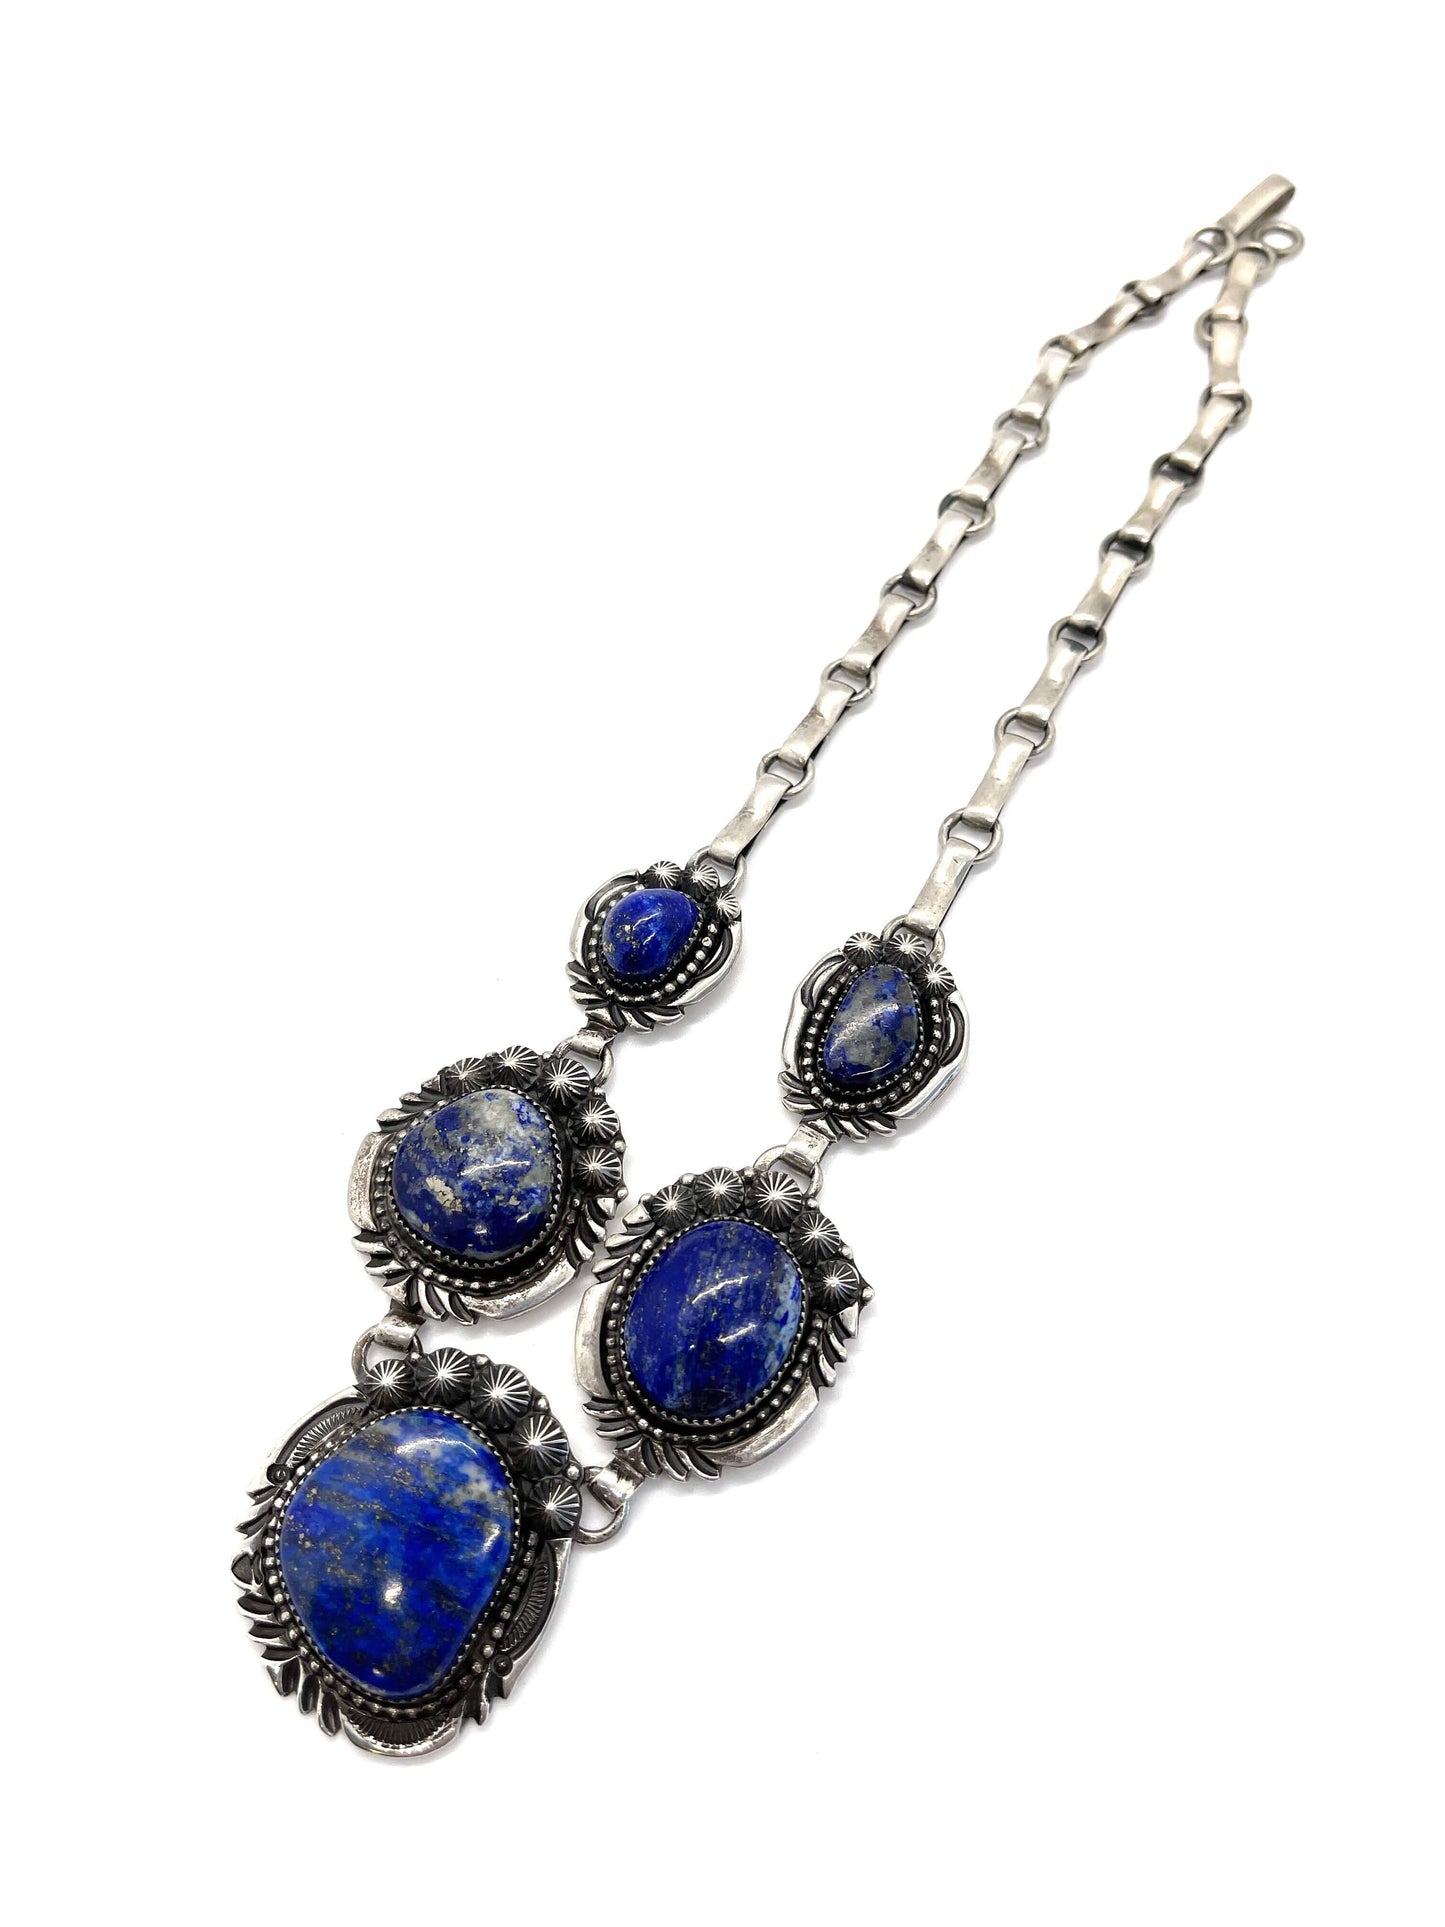 Lapis Necklace-jewelry-Jeanette Dale-Sorrel Sky Gallery